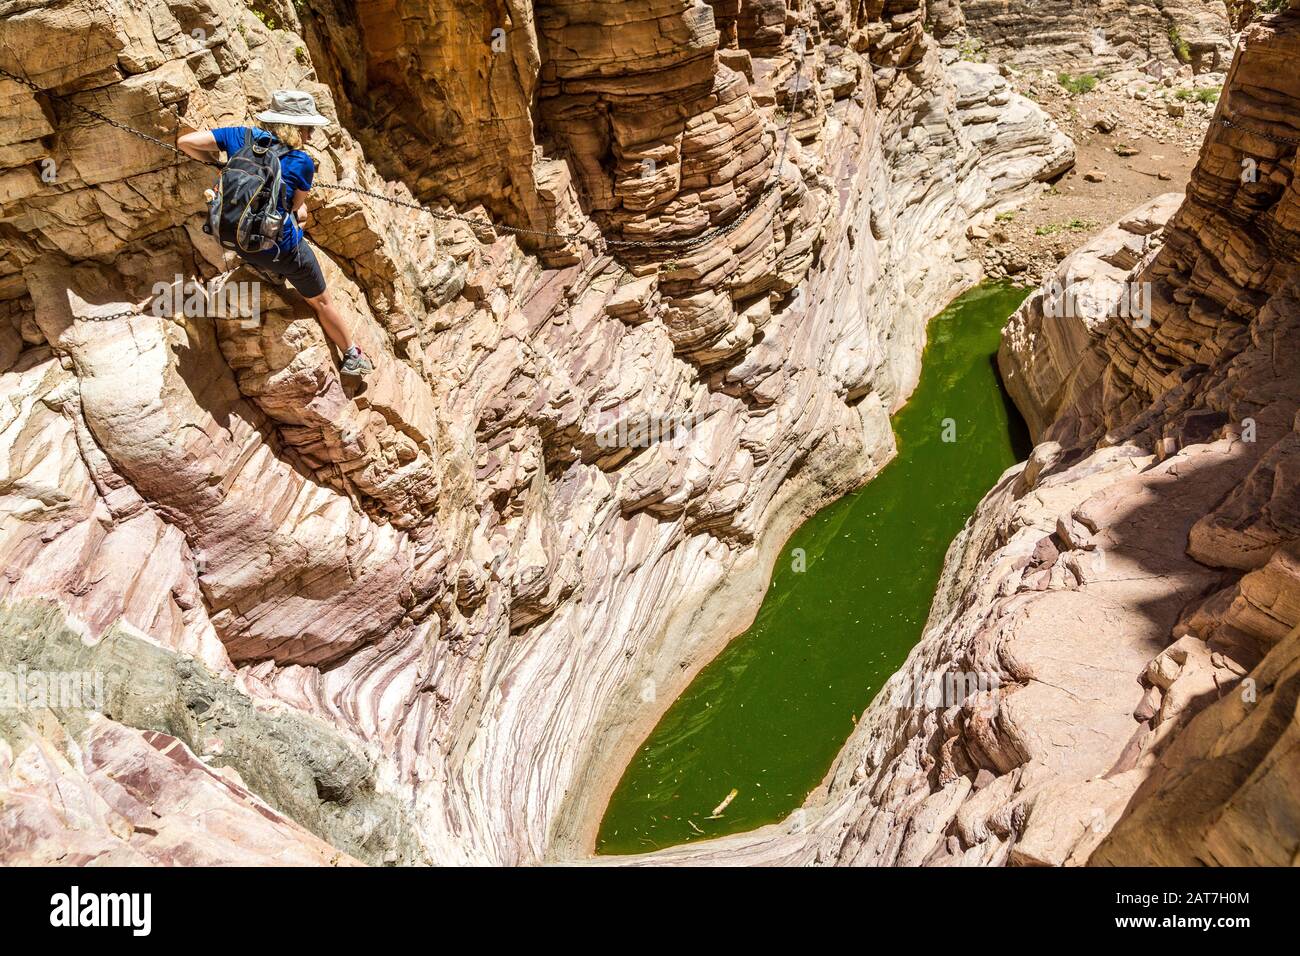 Young woman climbing down in a canyon with a natural pool at the bottom and steep rock faces around it, Olive Trail, Namib Naukluft Park, Namibia Stock Photo